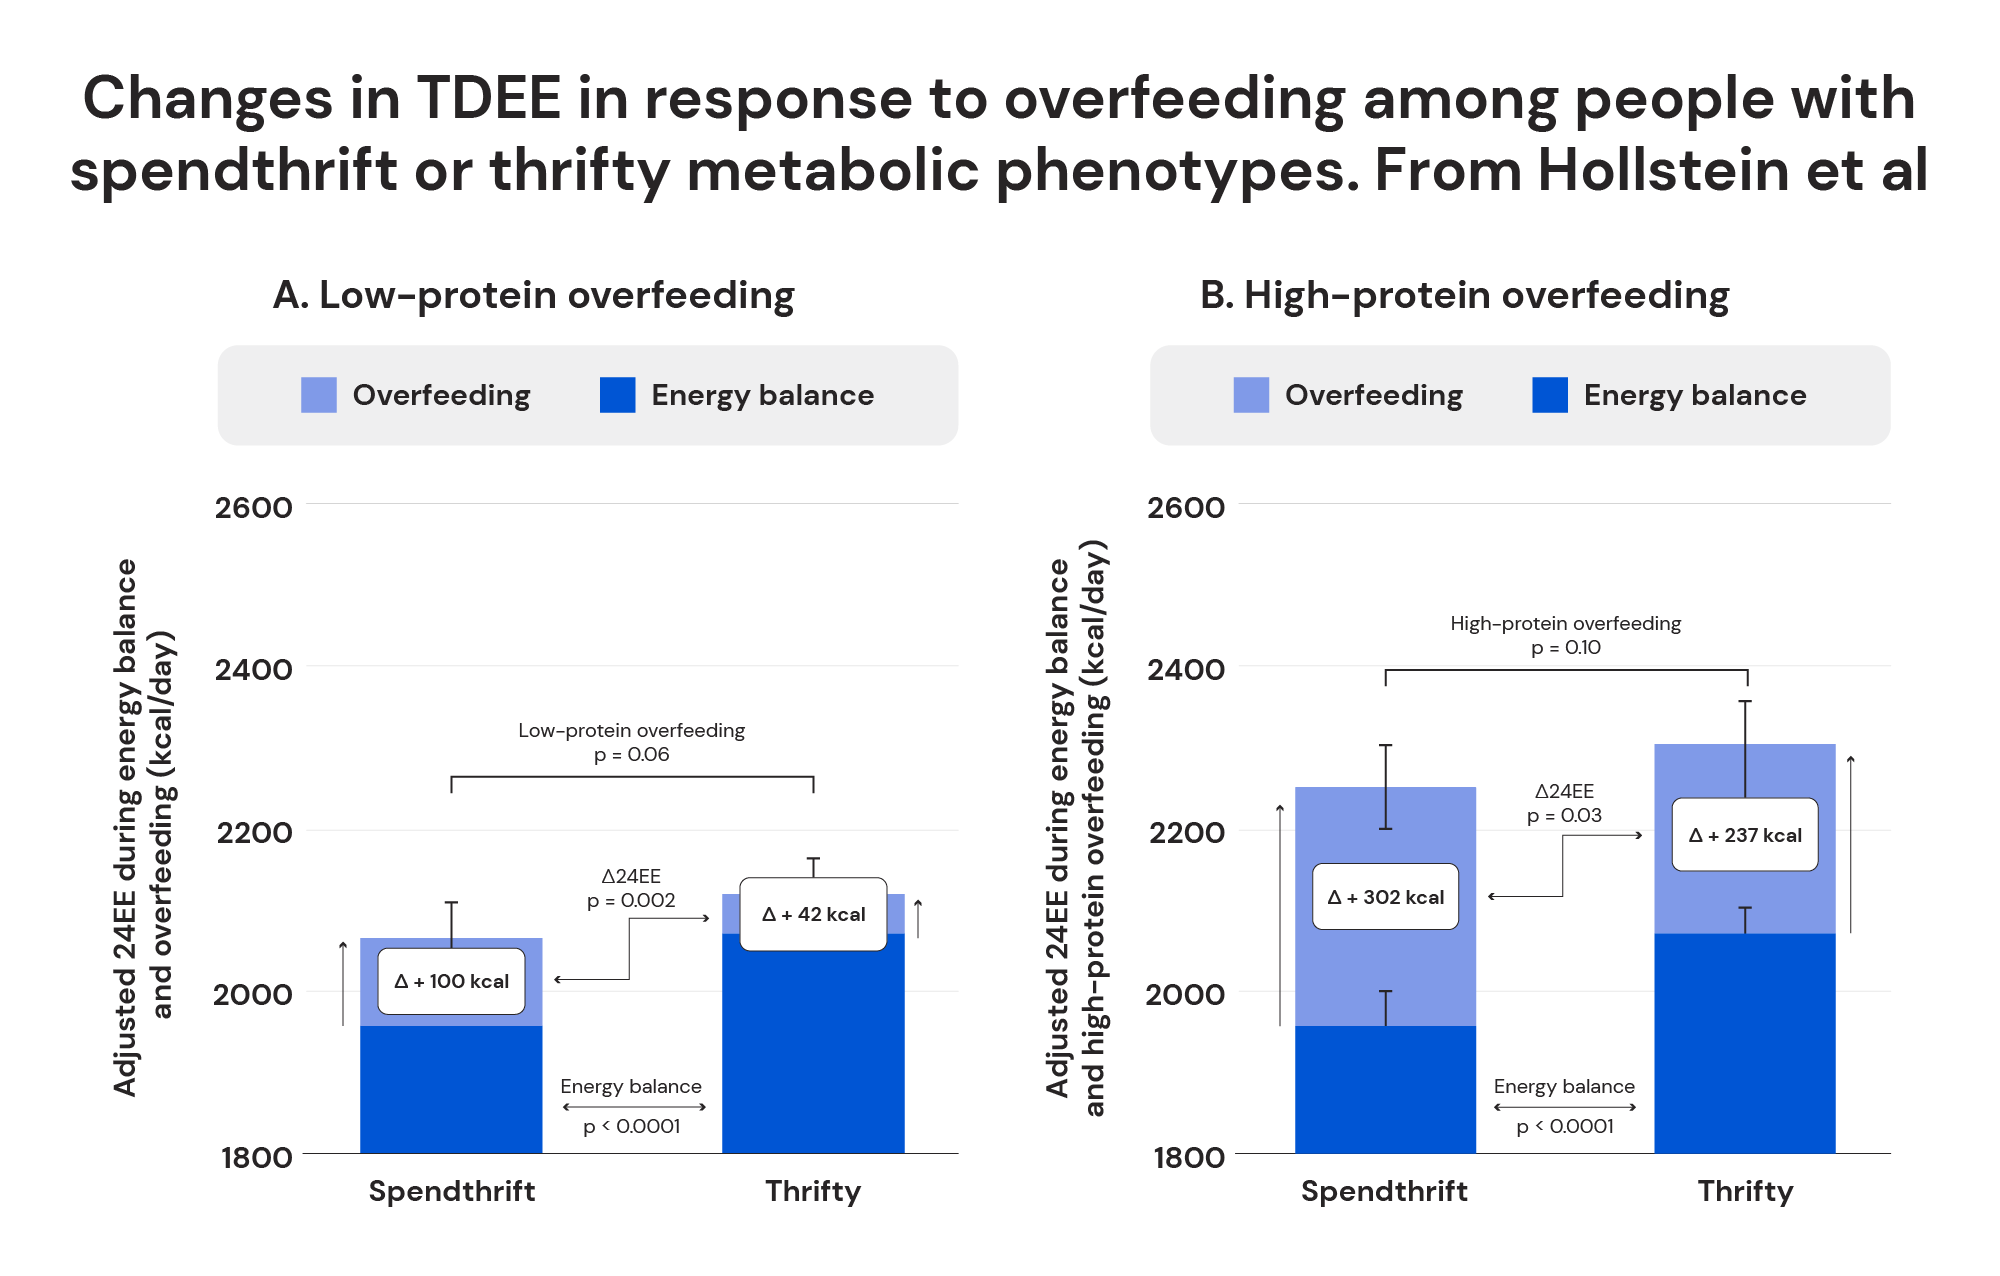 Changes in TDEE in response to overfeeding among people with spendthrift or thrifty metabolic phenotypes